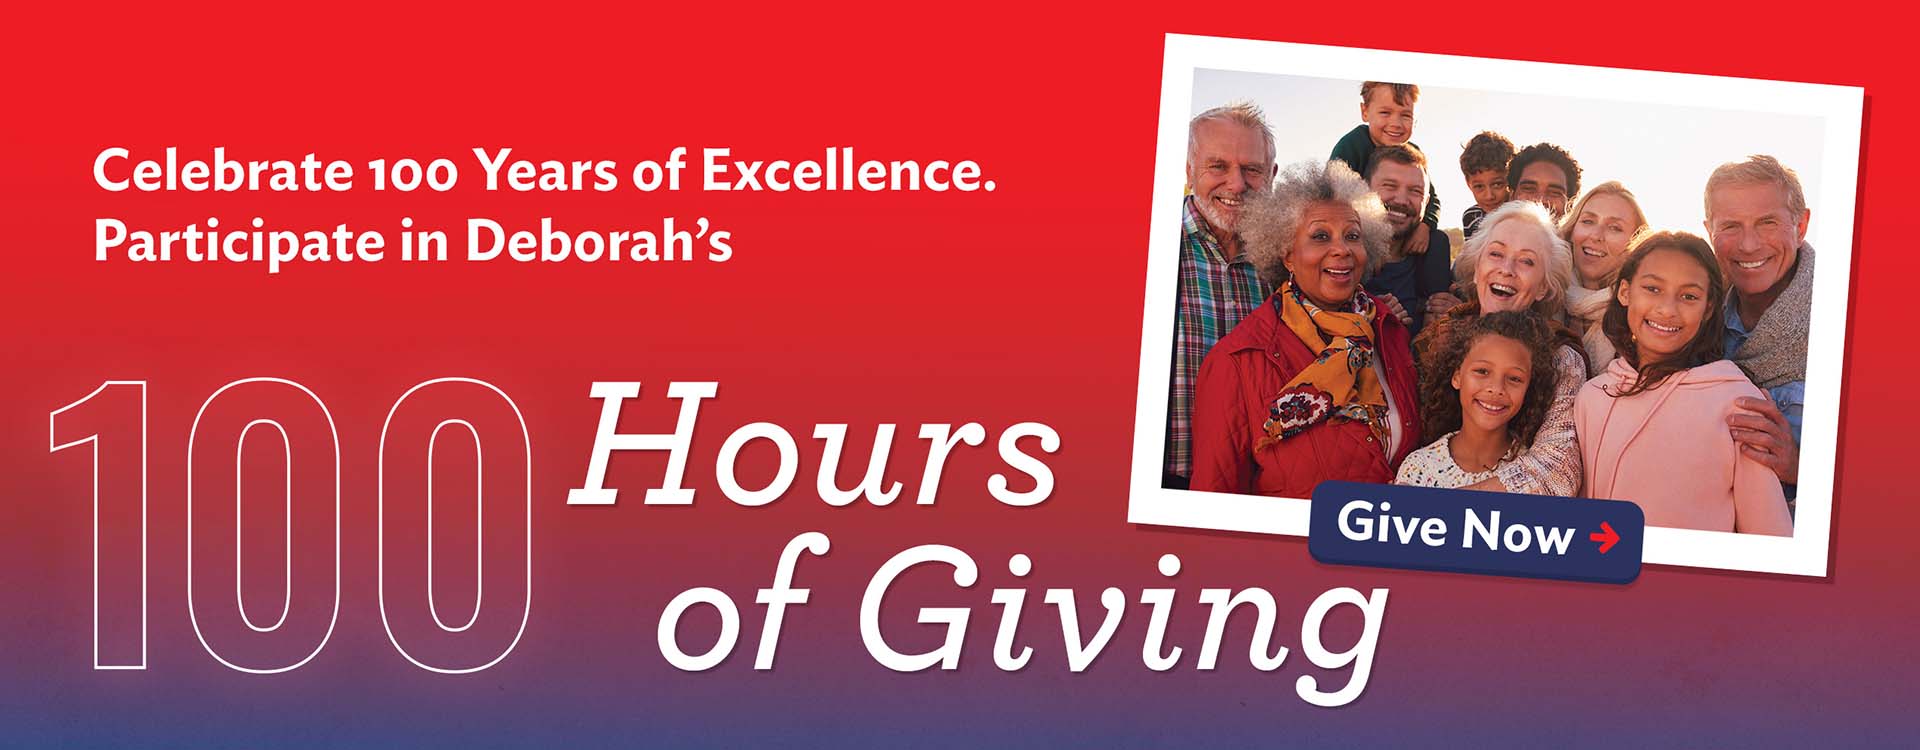 Celebrate 100 Years of Excellence. Participate in Deborah's 100 Hours of Giving. Give Now!